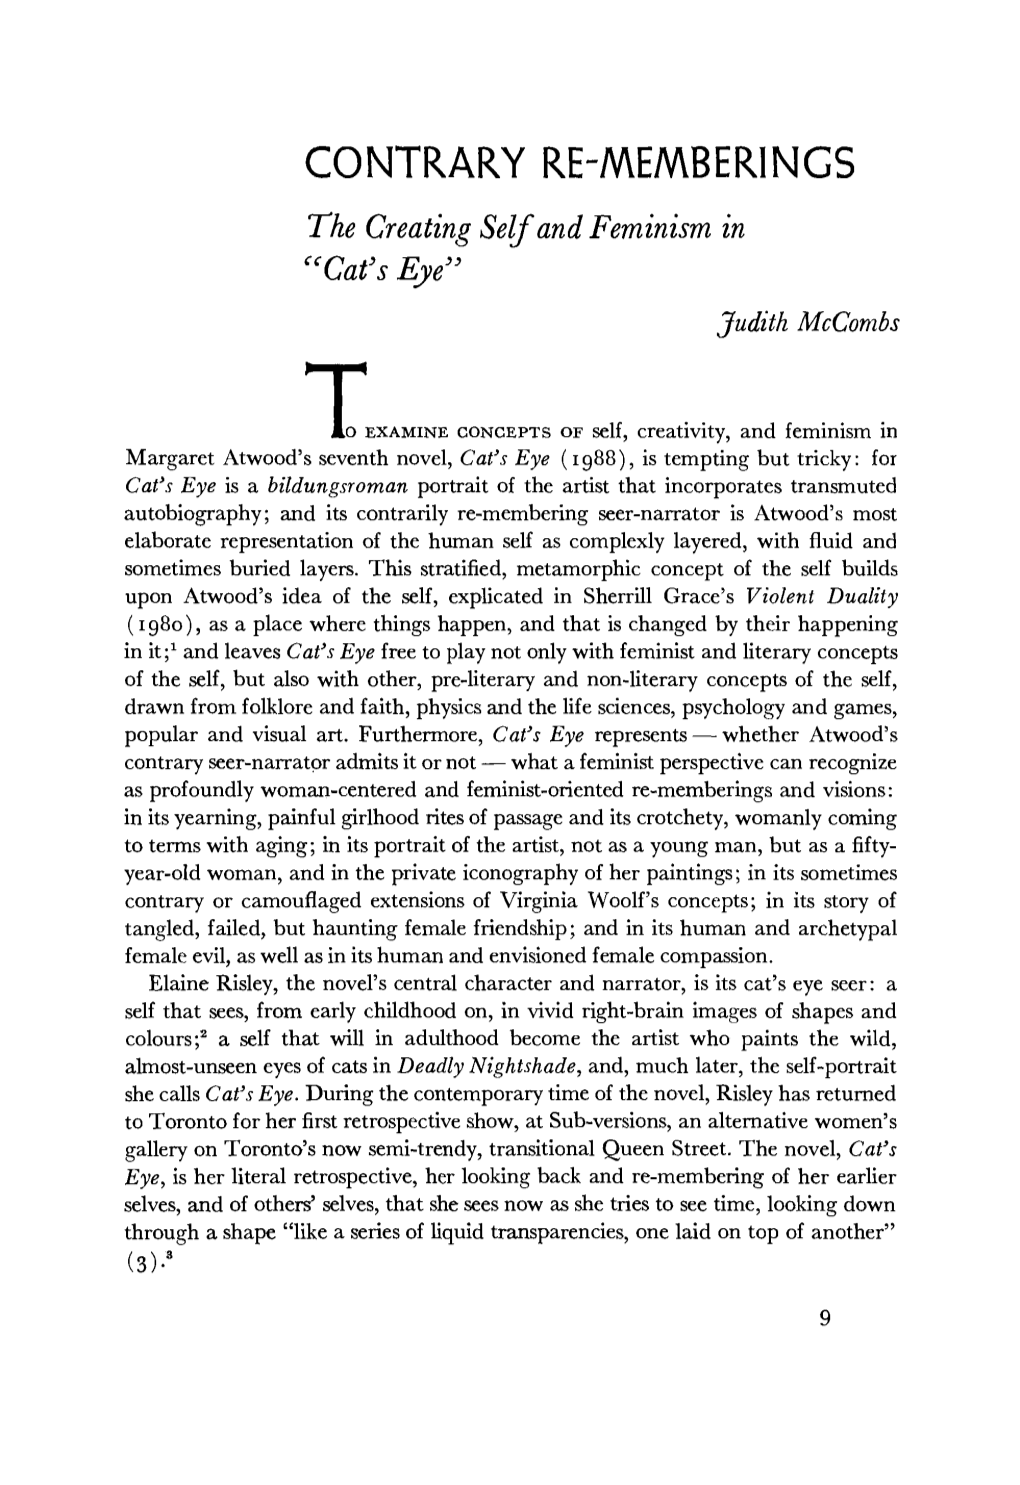 CONTRARY RE-MEMBERINGS the Creating Self and Feminism in "Cafs Eye'3 Judith Mccombs